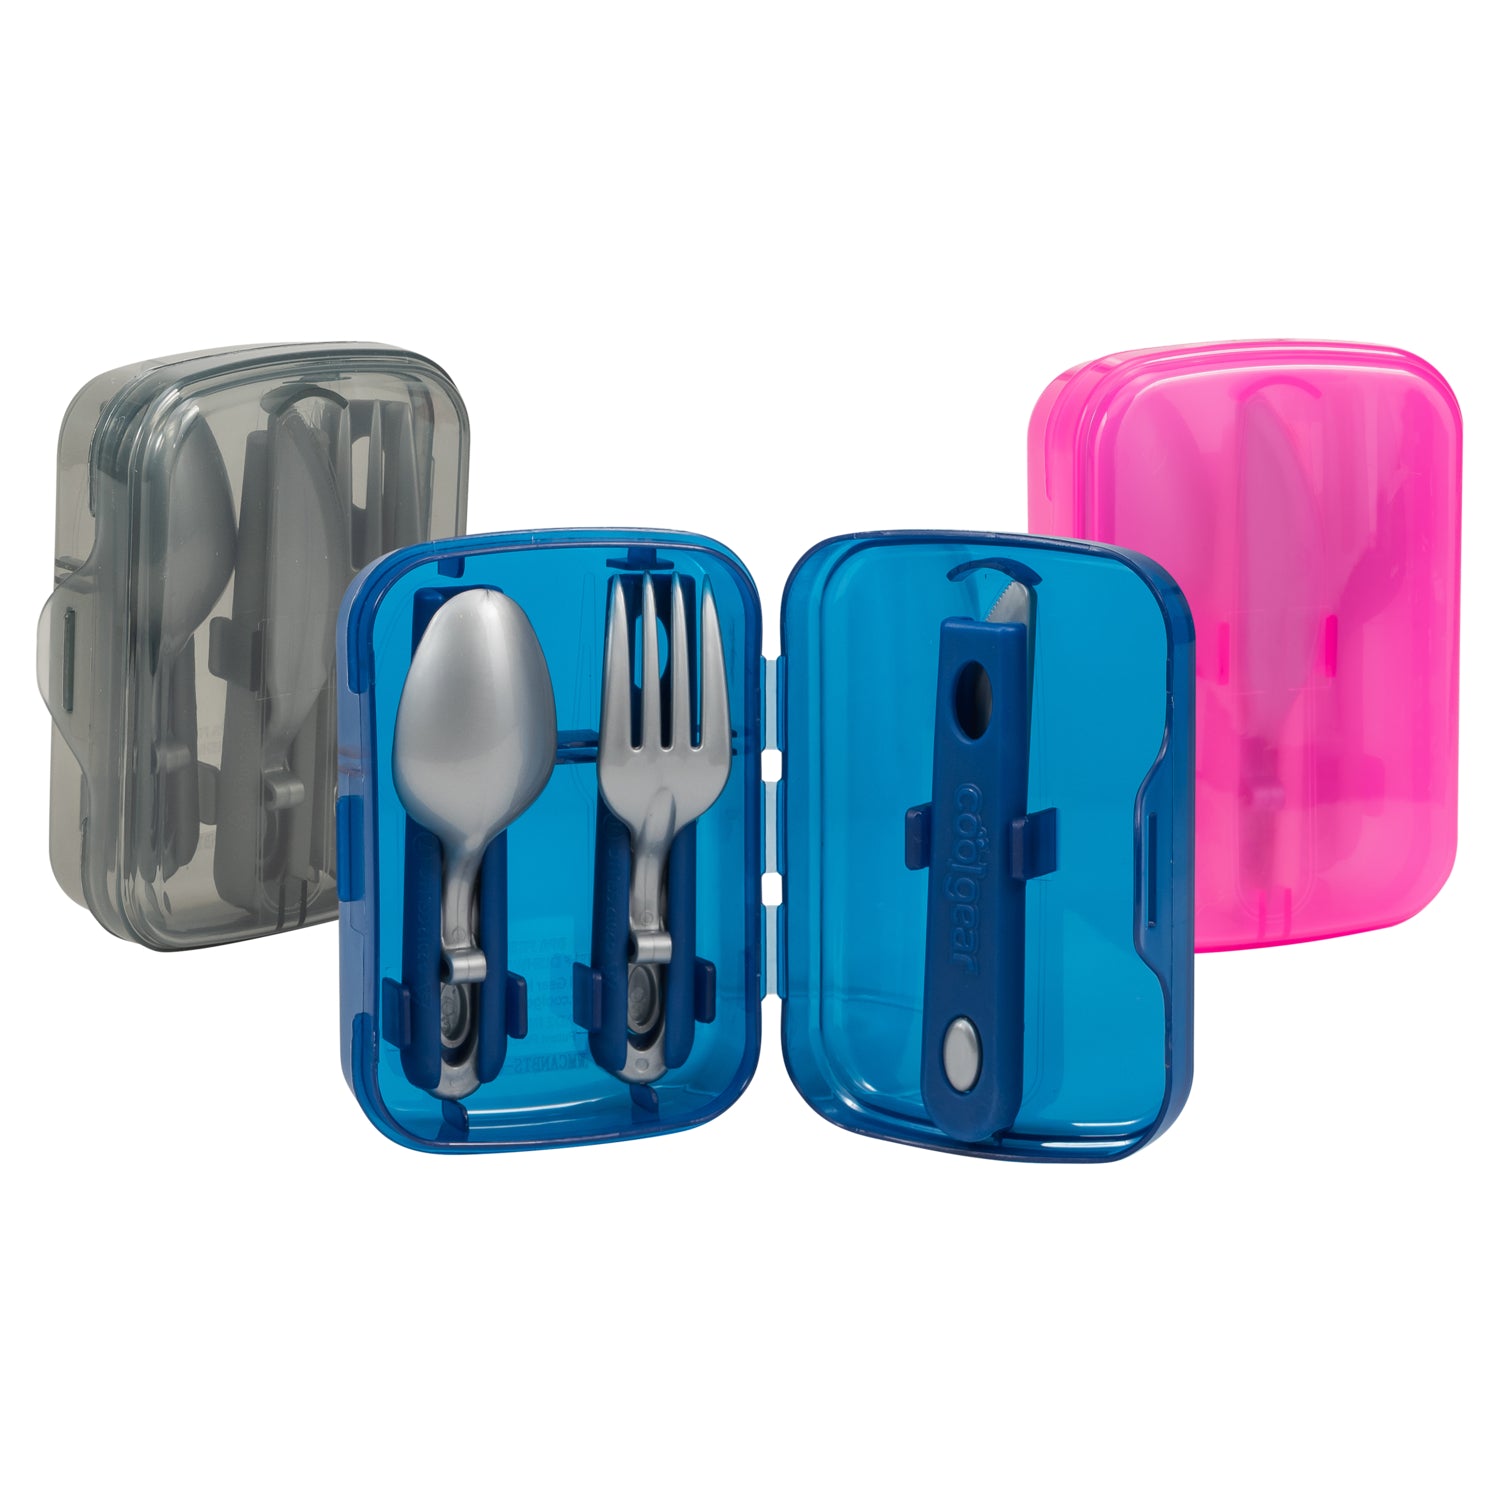 Travel Reusable Utensils Silverware with Case,Camping Cutlery set